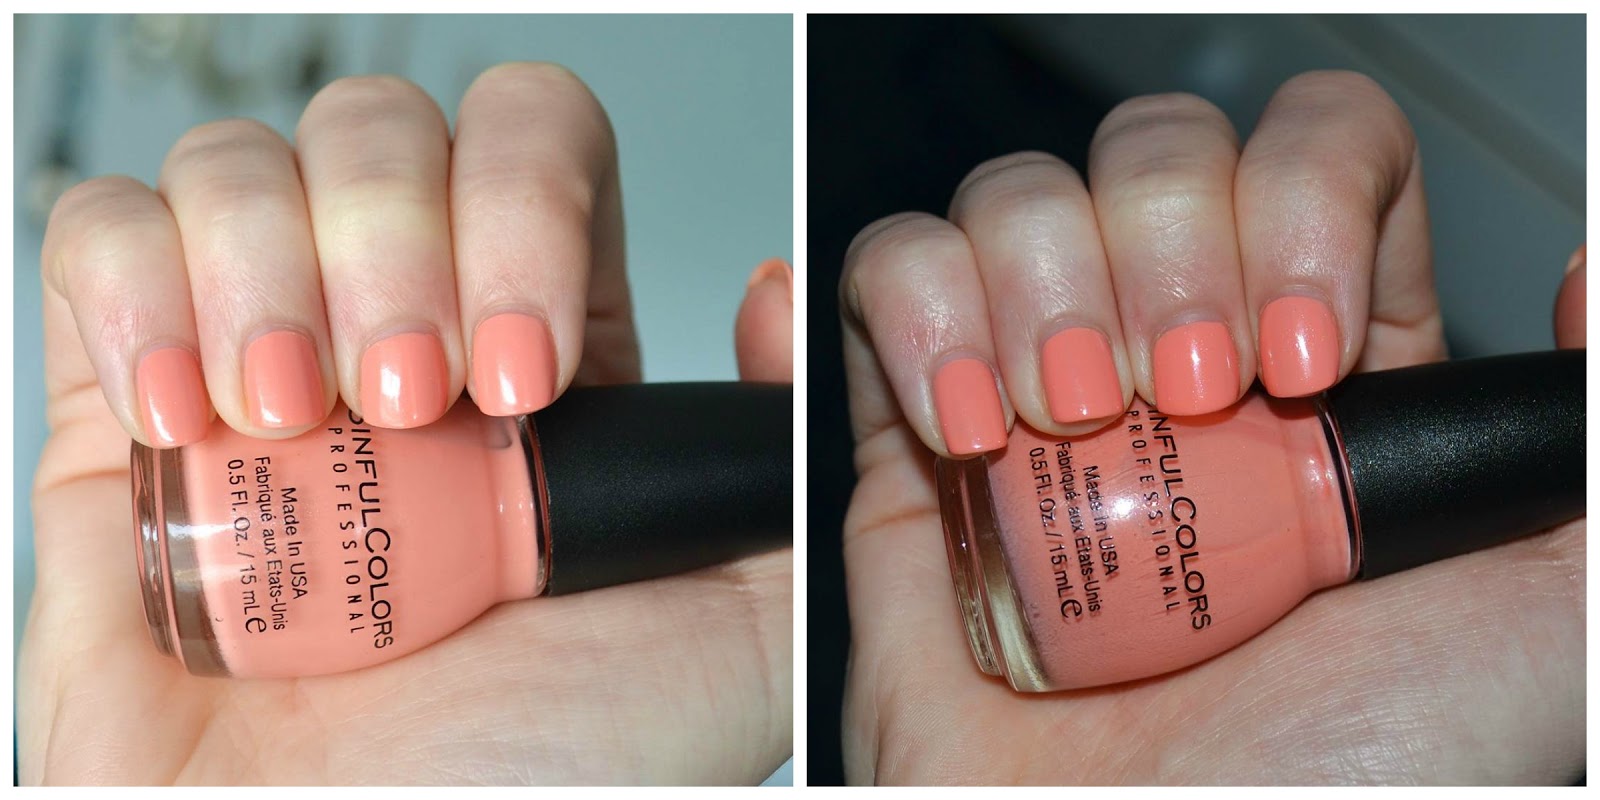 8. Sinful Colors Jam Out Nail Polish Review - wide 3